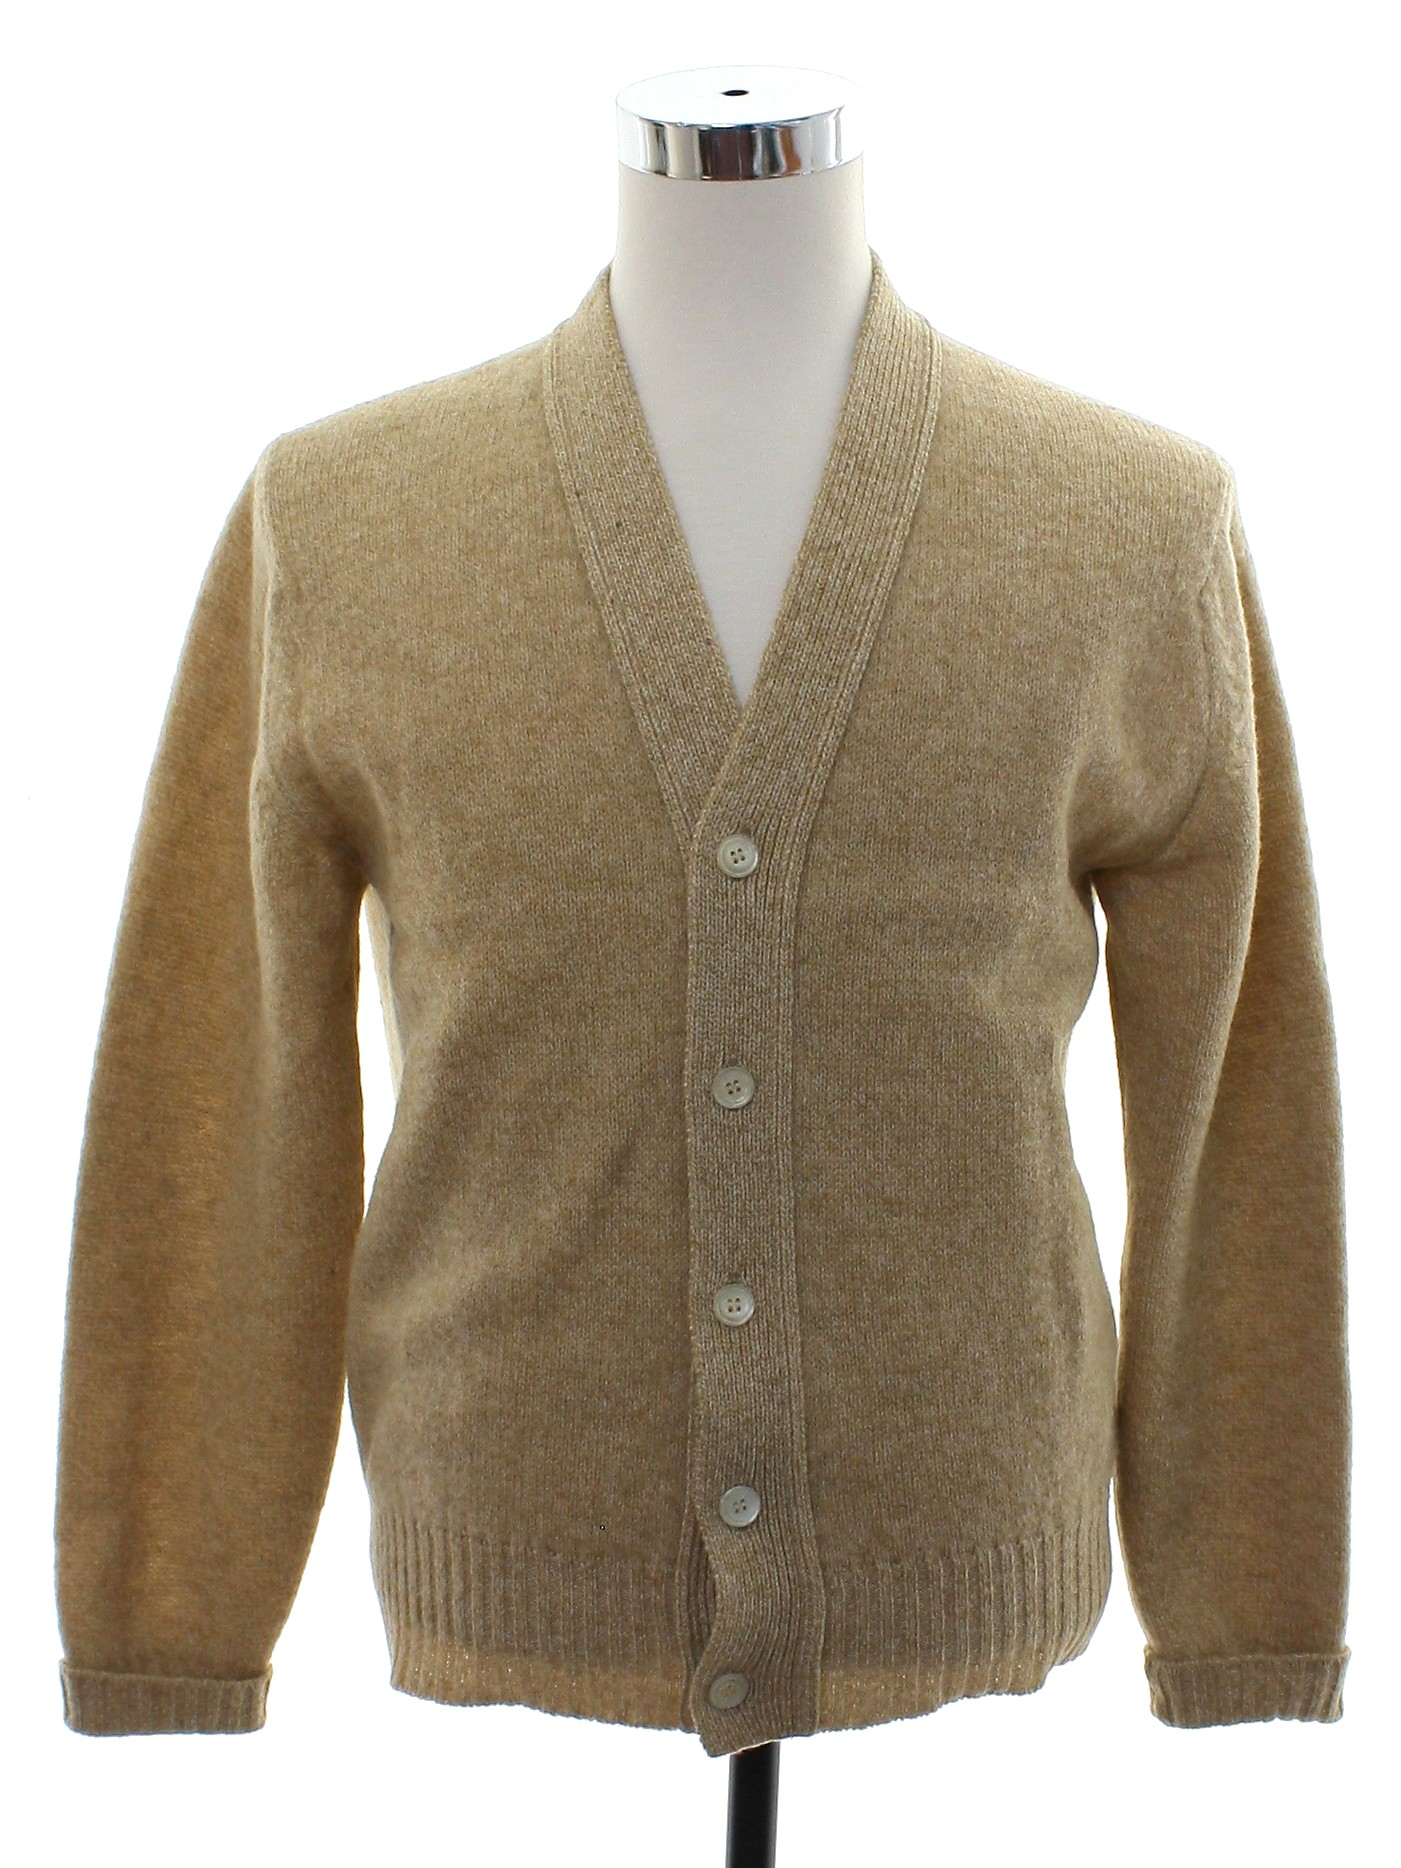 Robinsons by Alan Paine 70's Vintage Caridgan Sweater: 70s -Robinsons ...